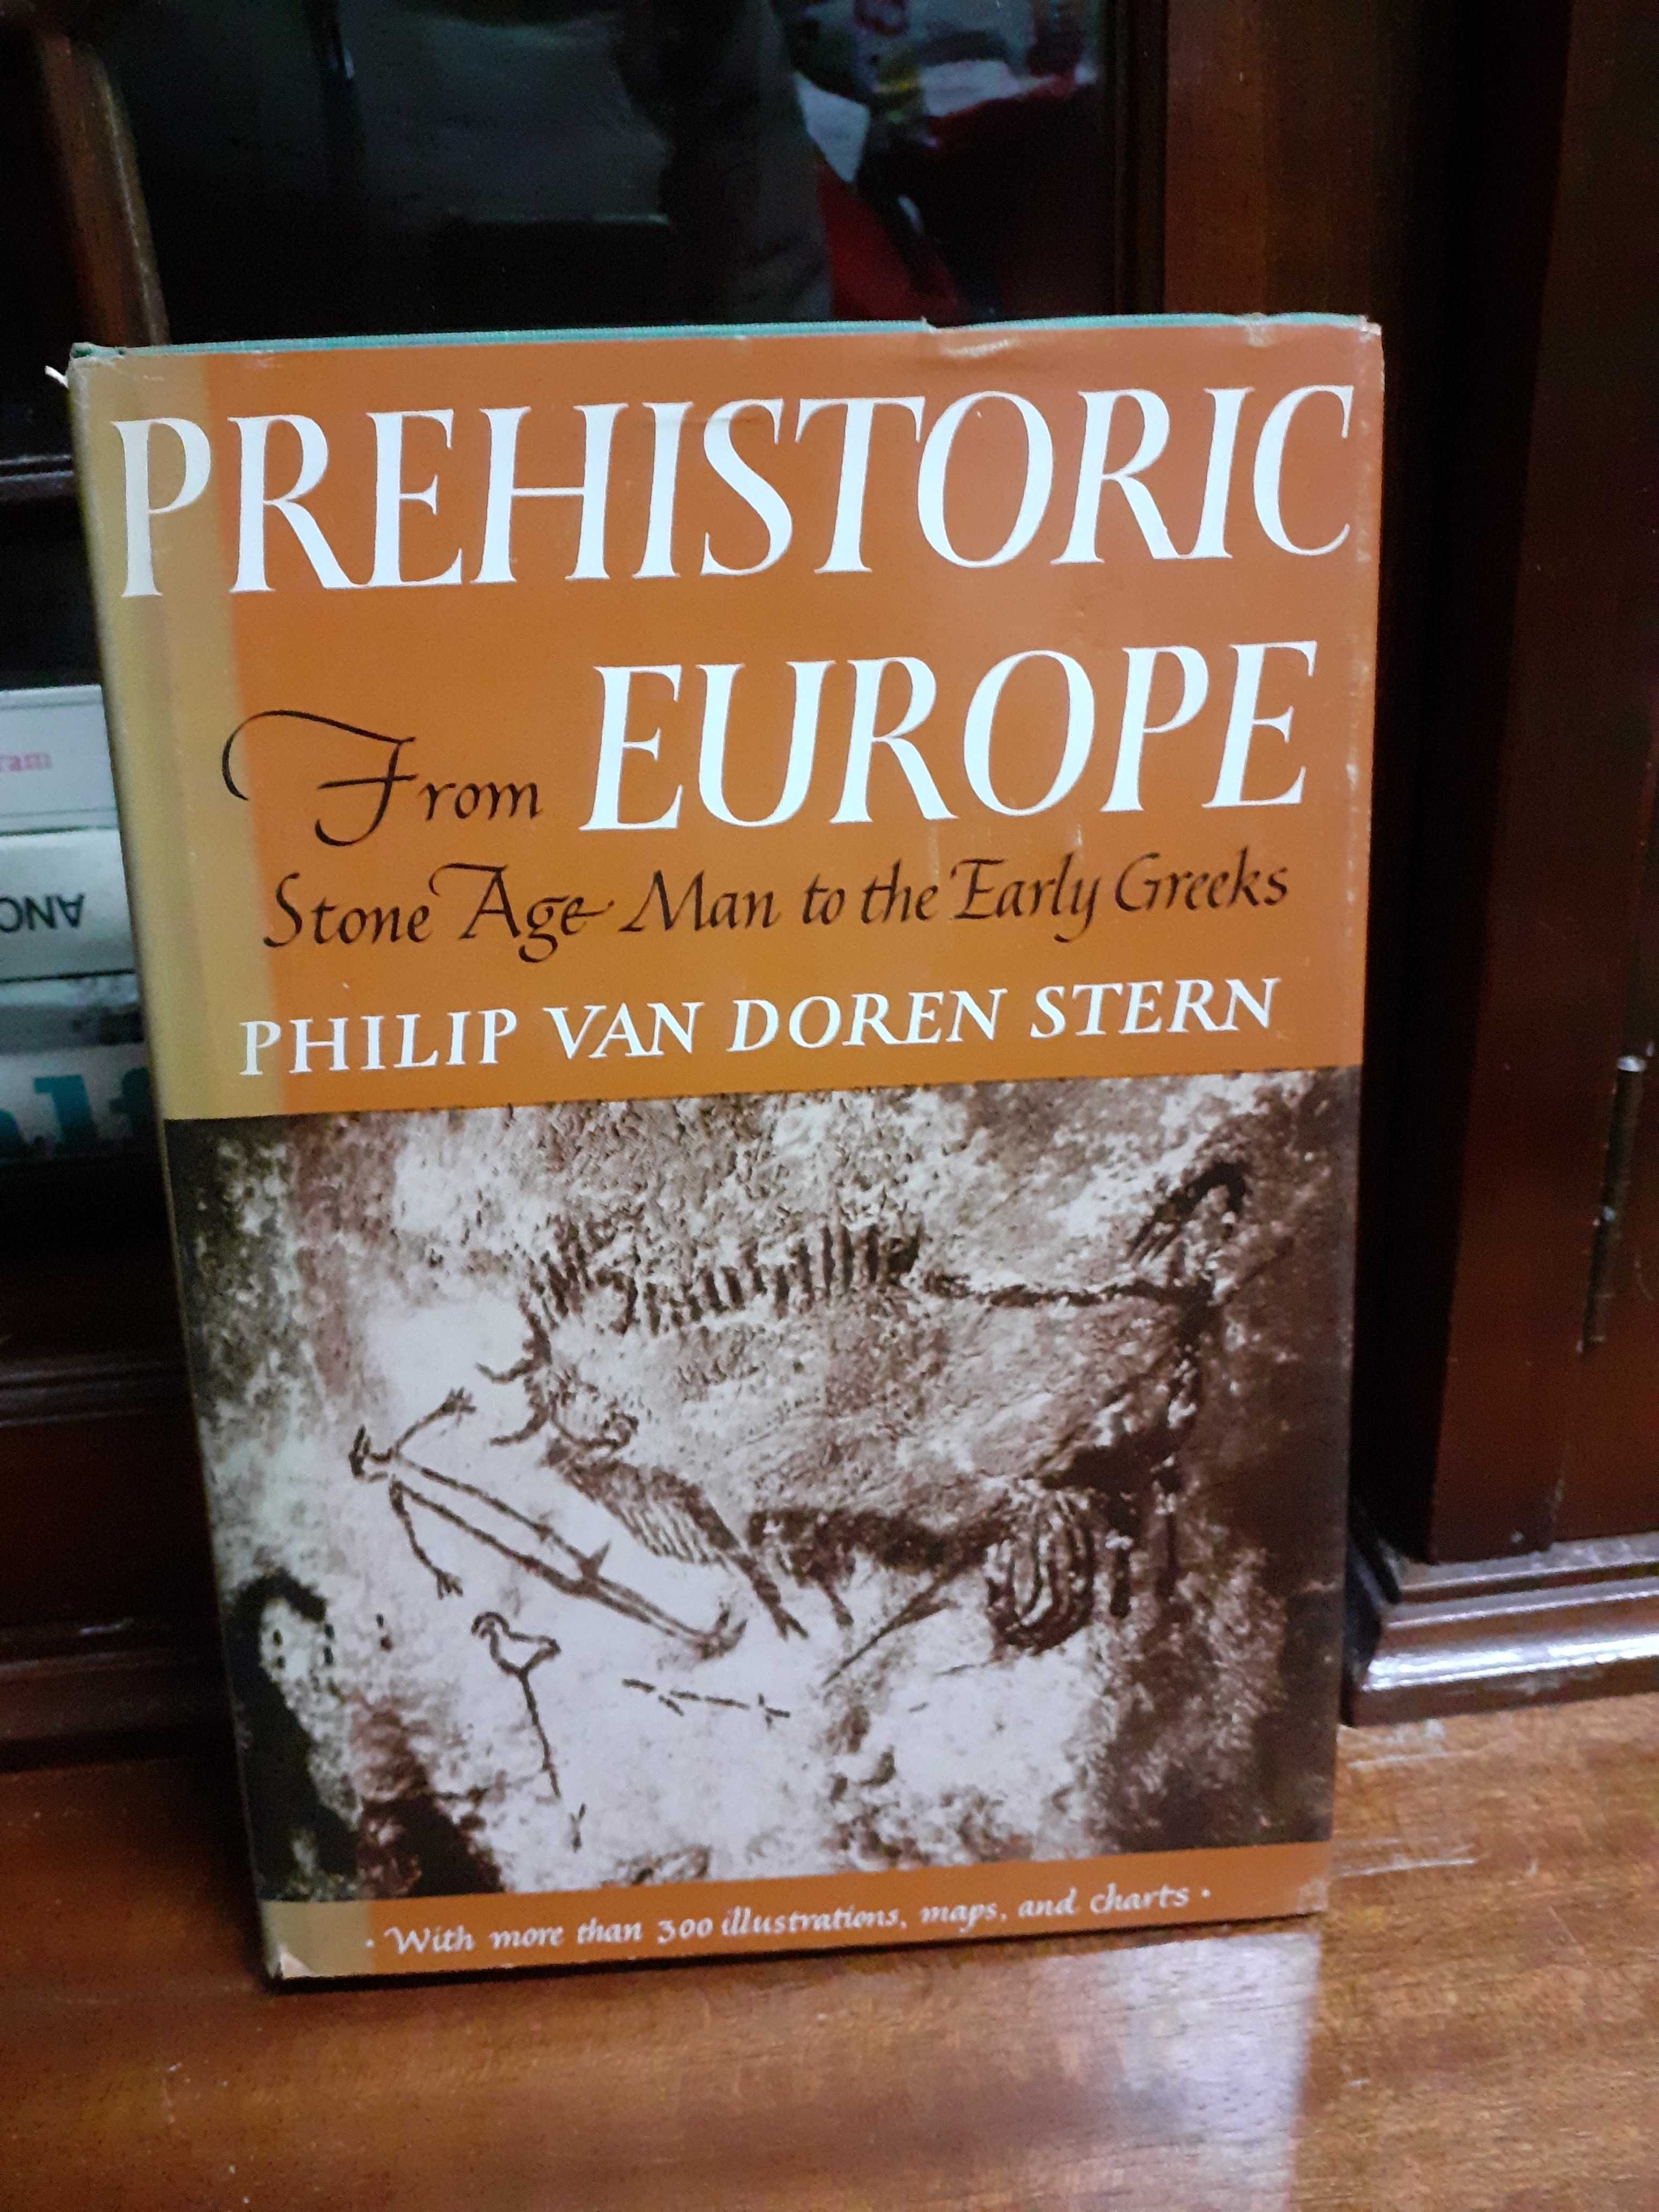 Livro Prehistoric Europe, from stone age man to the early Greeks